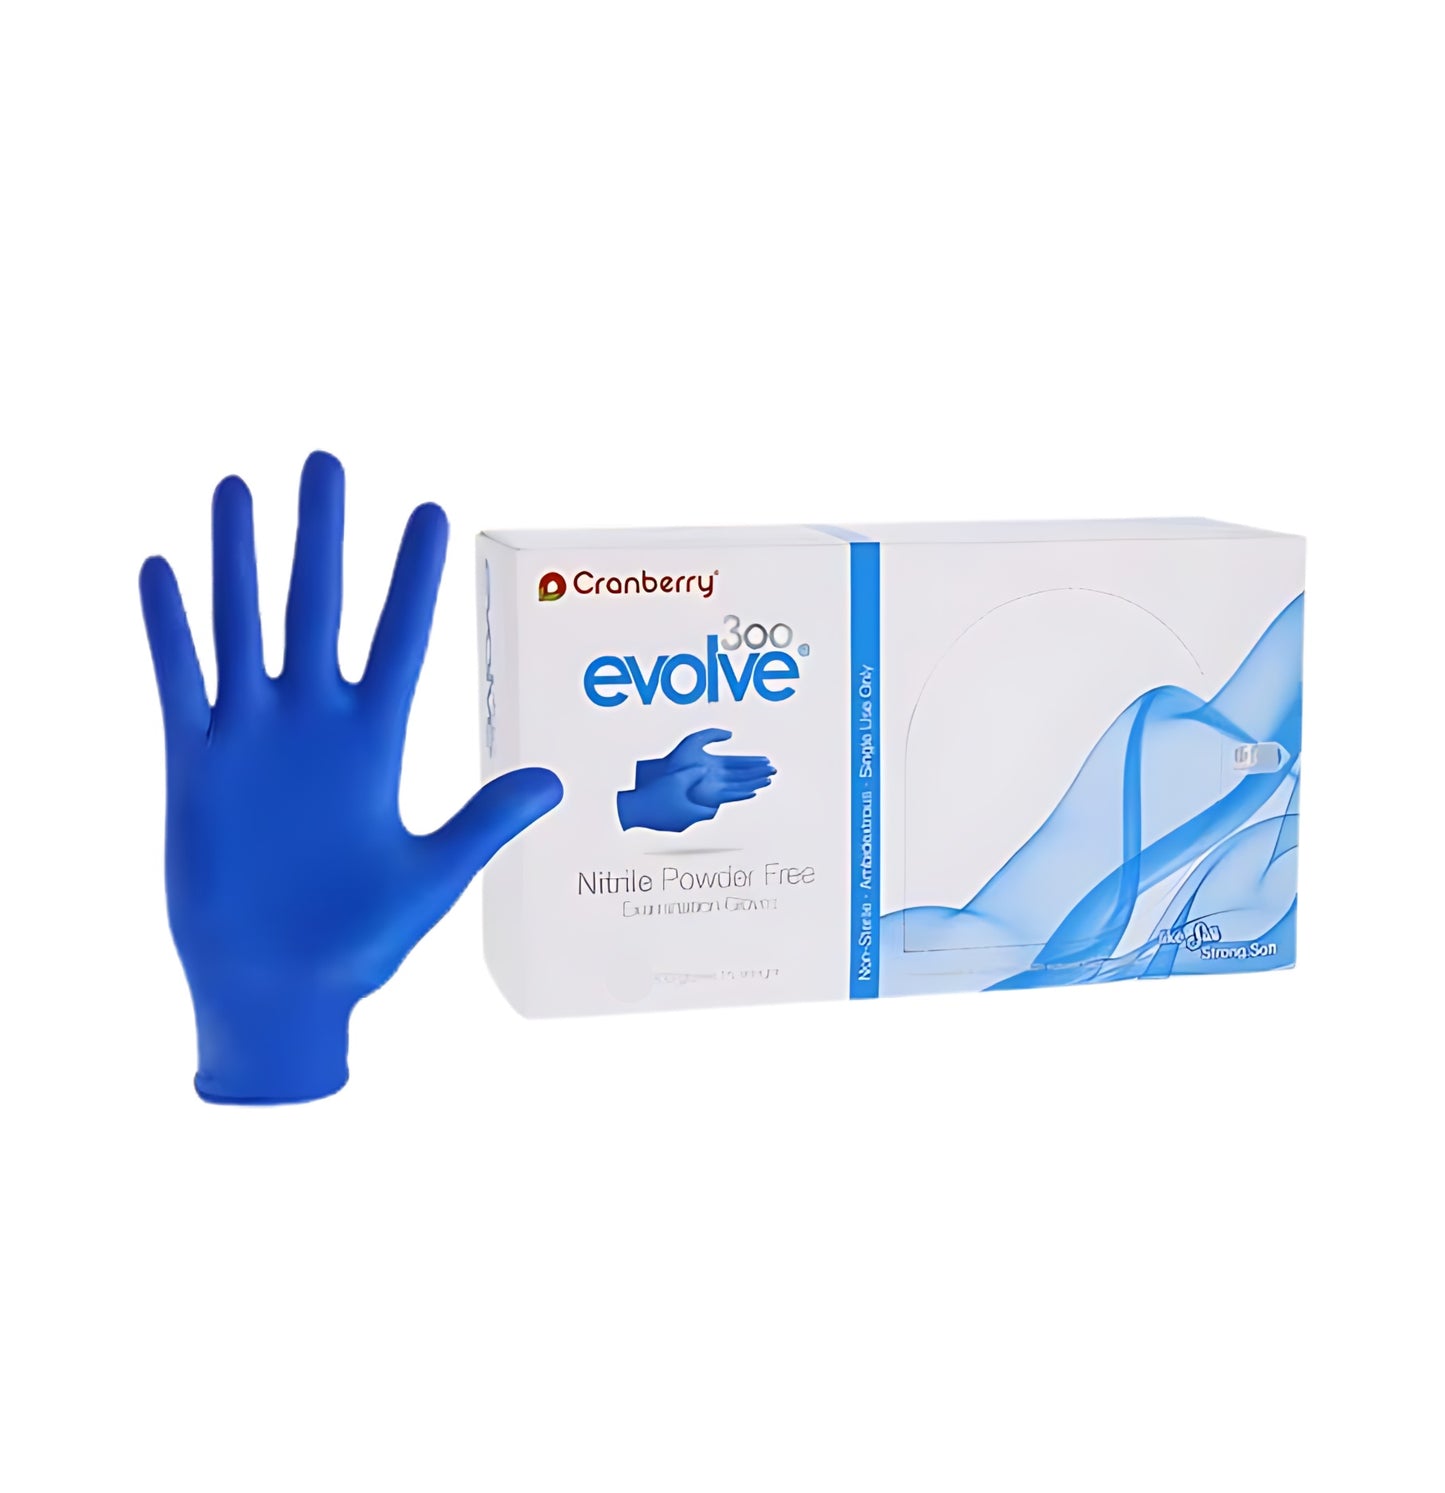 Box of Cranberry Evolve® 300 Powder Free Nitrile Exam Gloves, 300 Count, Royal Blue Glove